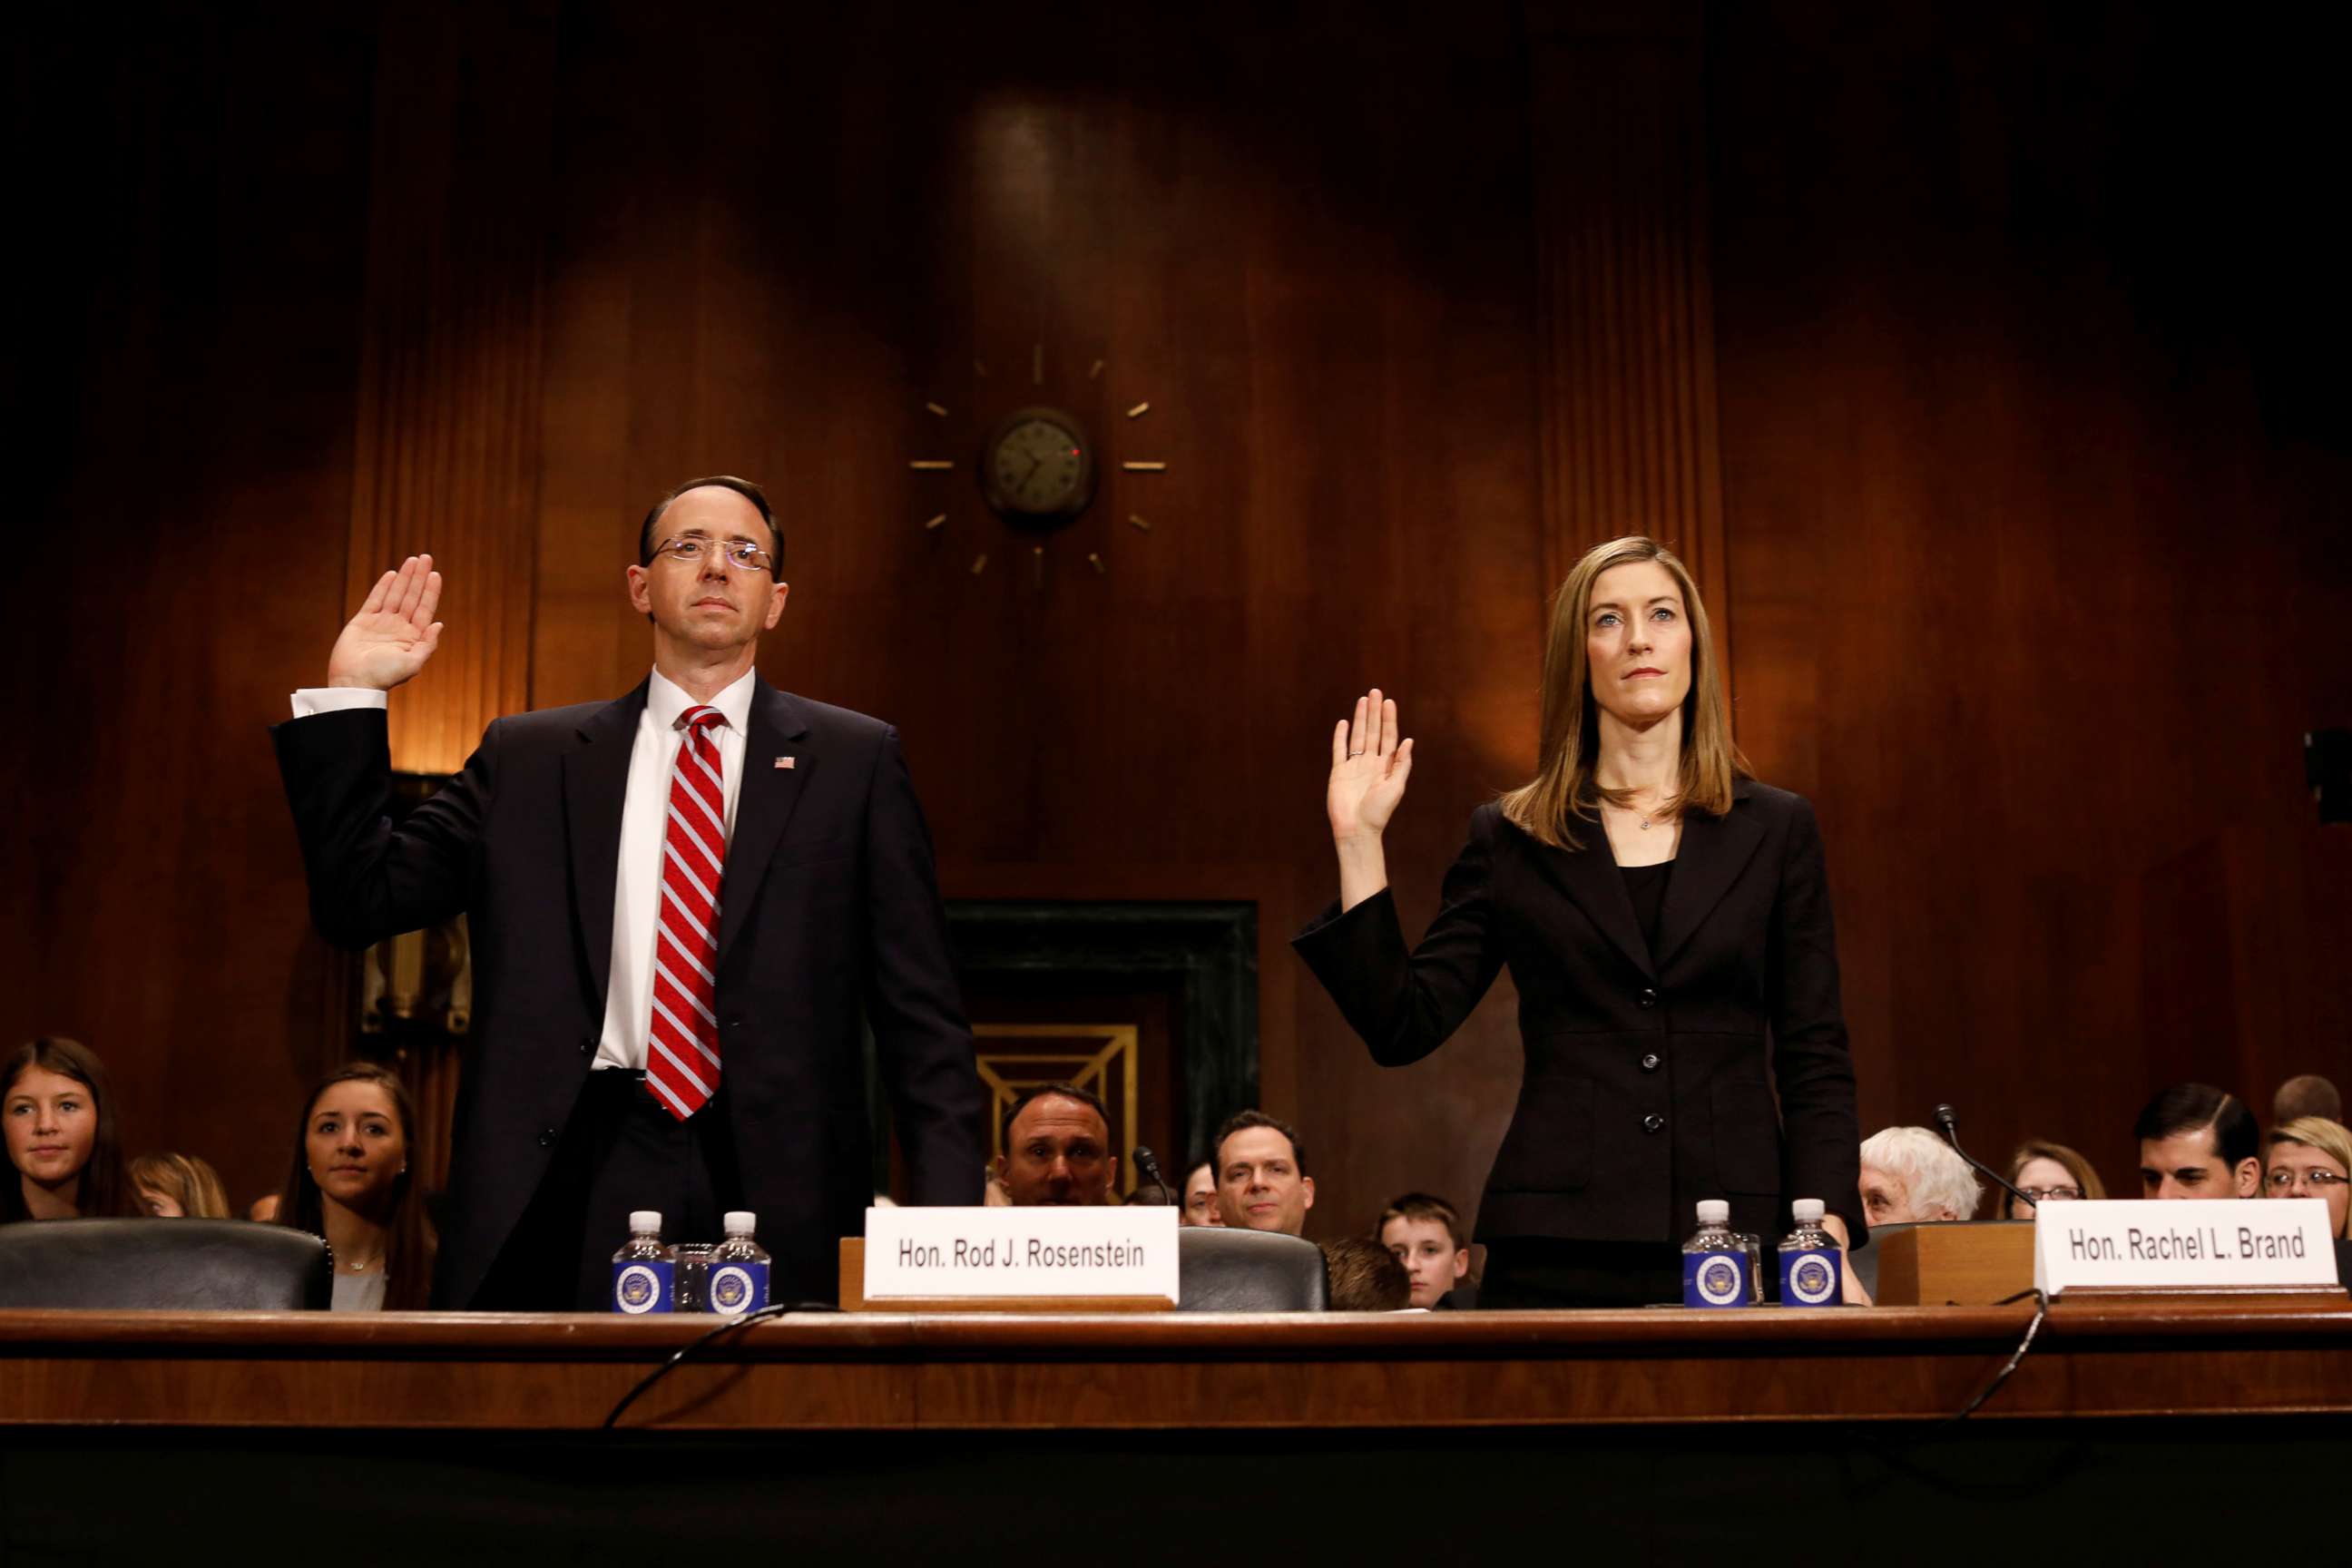 PHOTO: Rod Rosenstein, nominee to be Deputy Attorney General, and Rachel Brand, nominee for Associate Attorney General, are sworn before the Senate Judiciary Committee on Capitol Hill, in Washington, March 7, 2017.